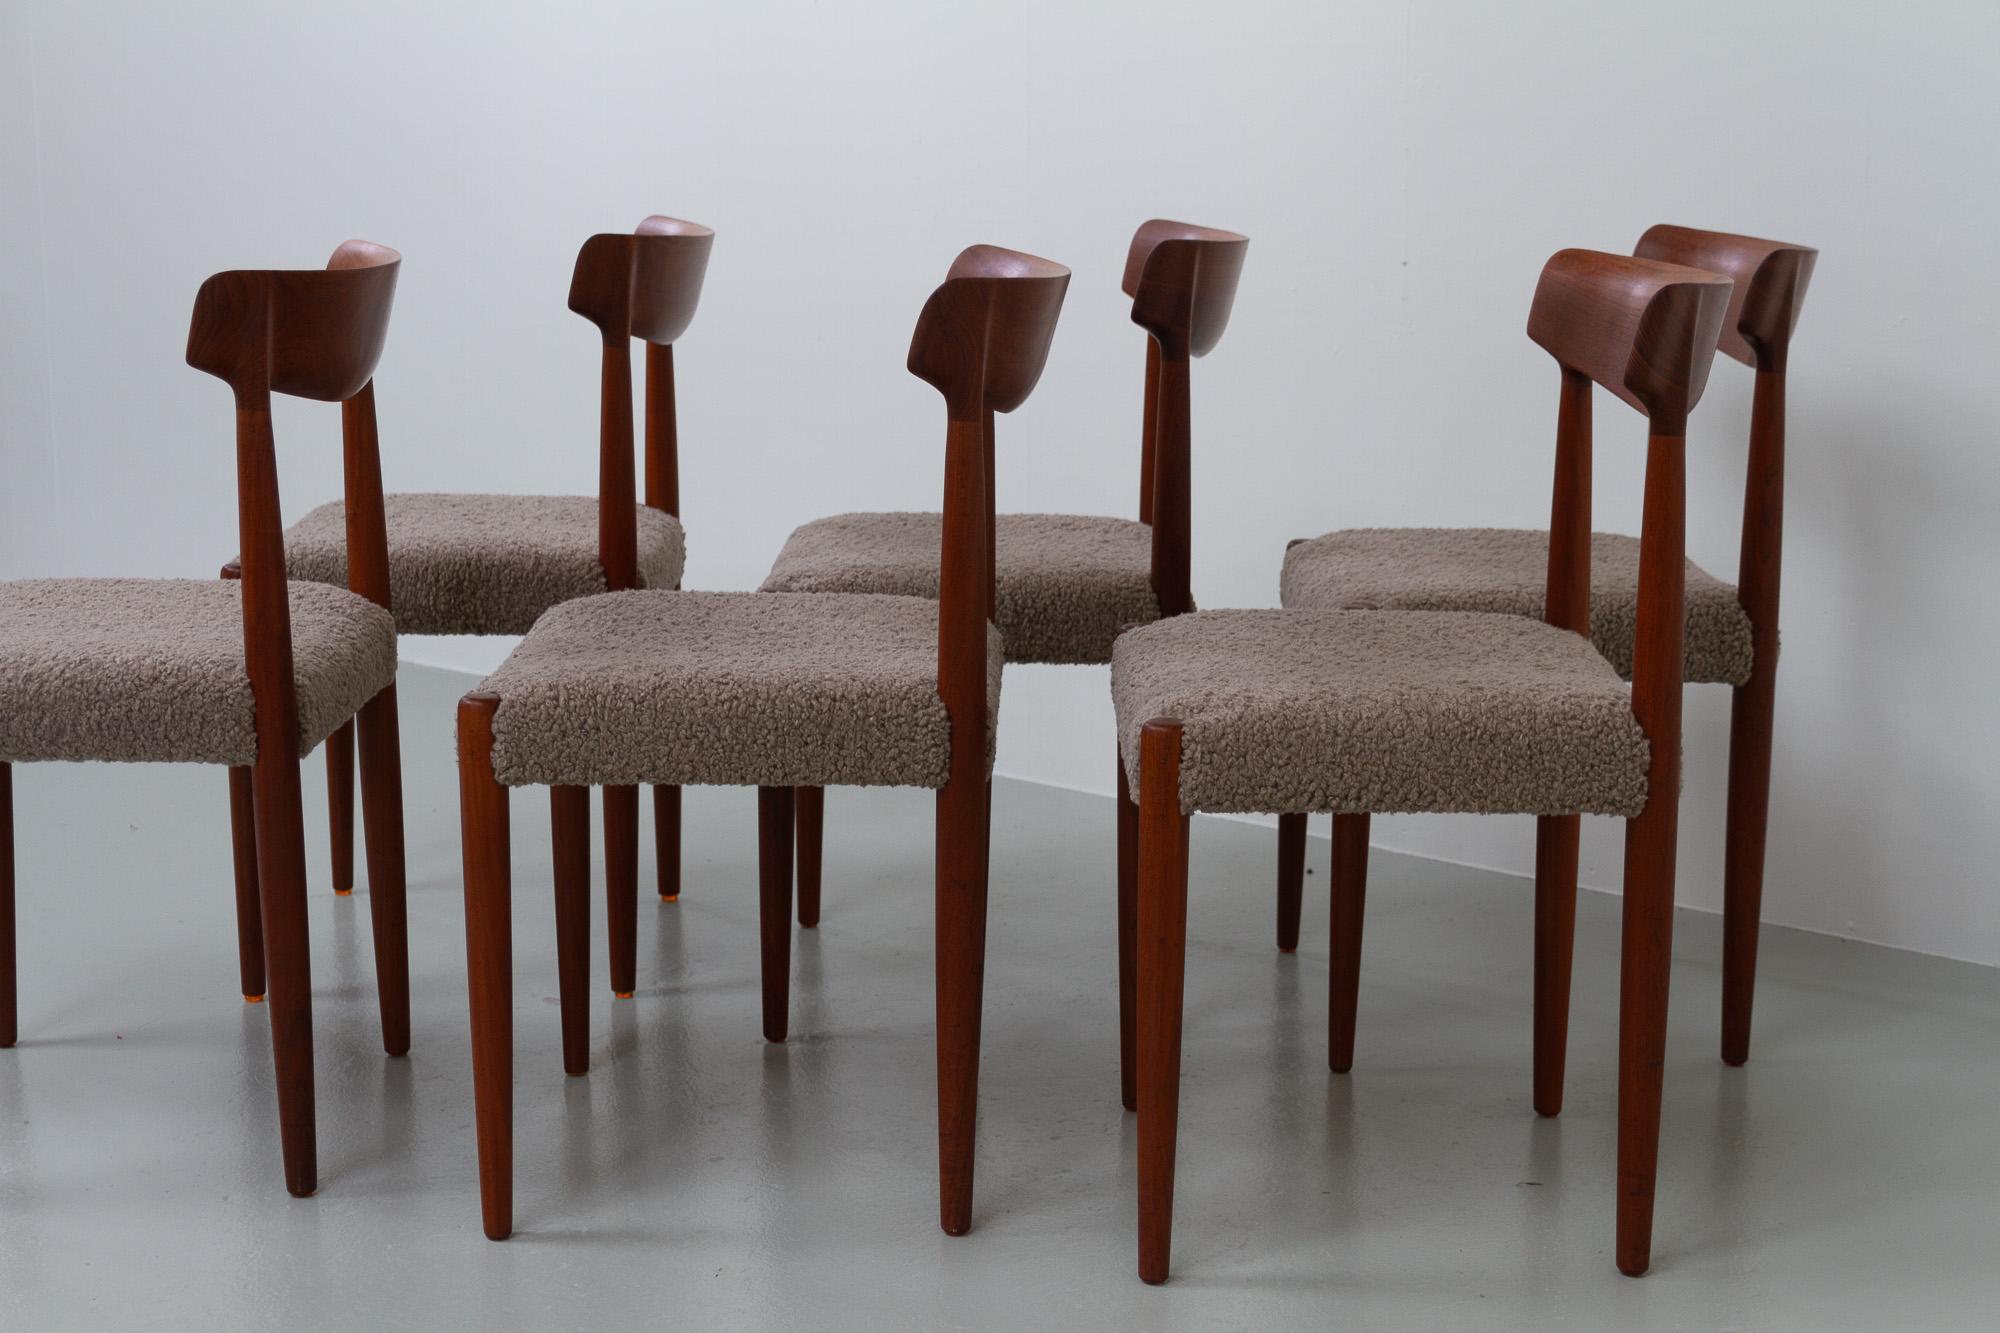 Mid-Century Modern Danish Modern Teak Dining Chairs by Knud Færch for Slagelse, 1960s. Set of 6. For Sale